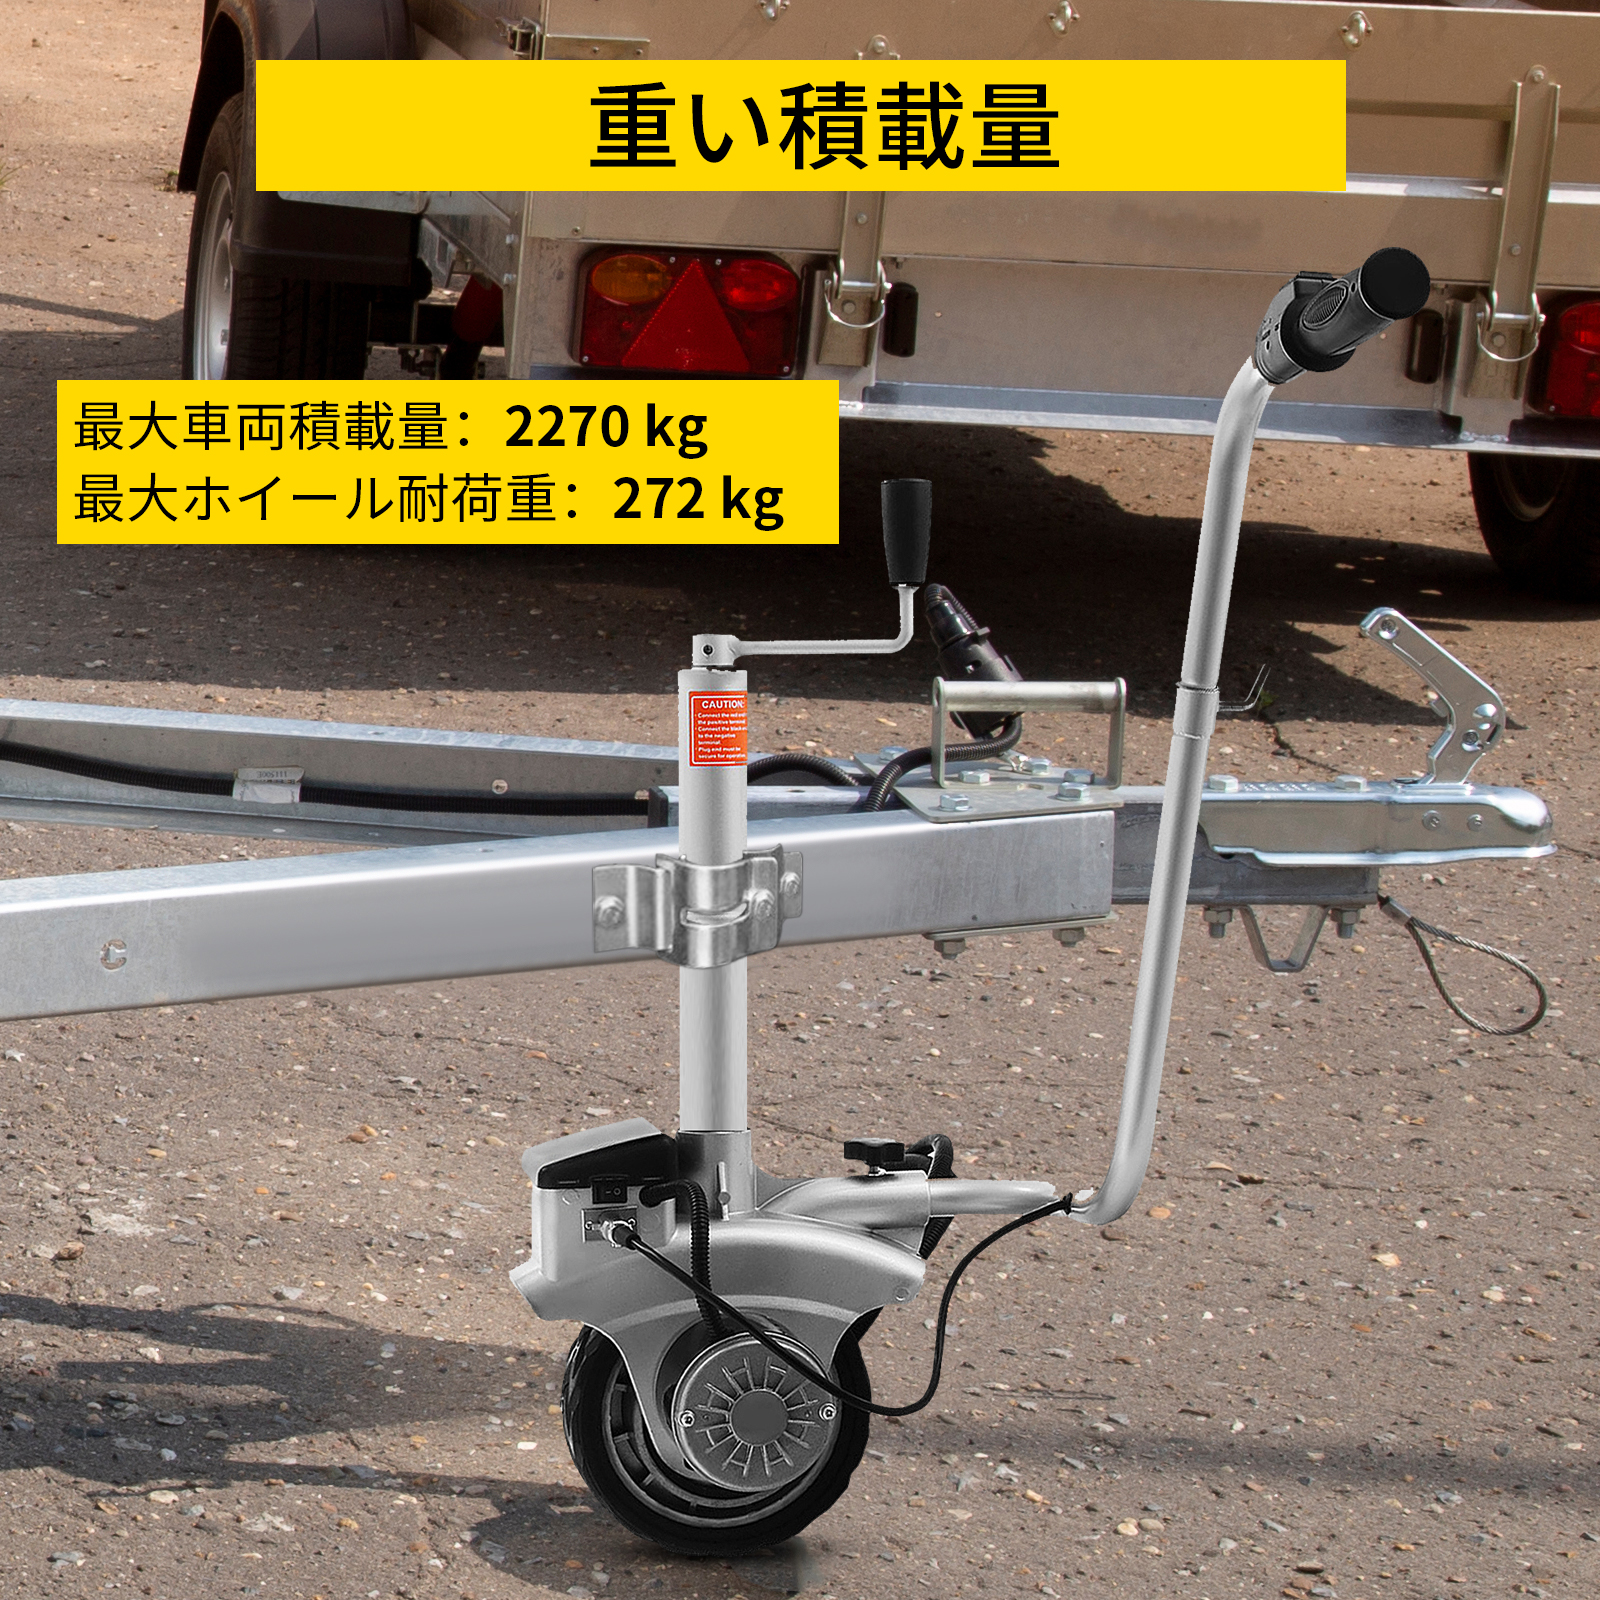 https://d2qc09rl1gfuof.cloudfront.net/product/12VJW01YCQ0000001/trailer-mover-dolly-jp-m100-2.jpg